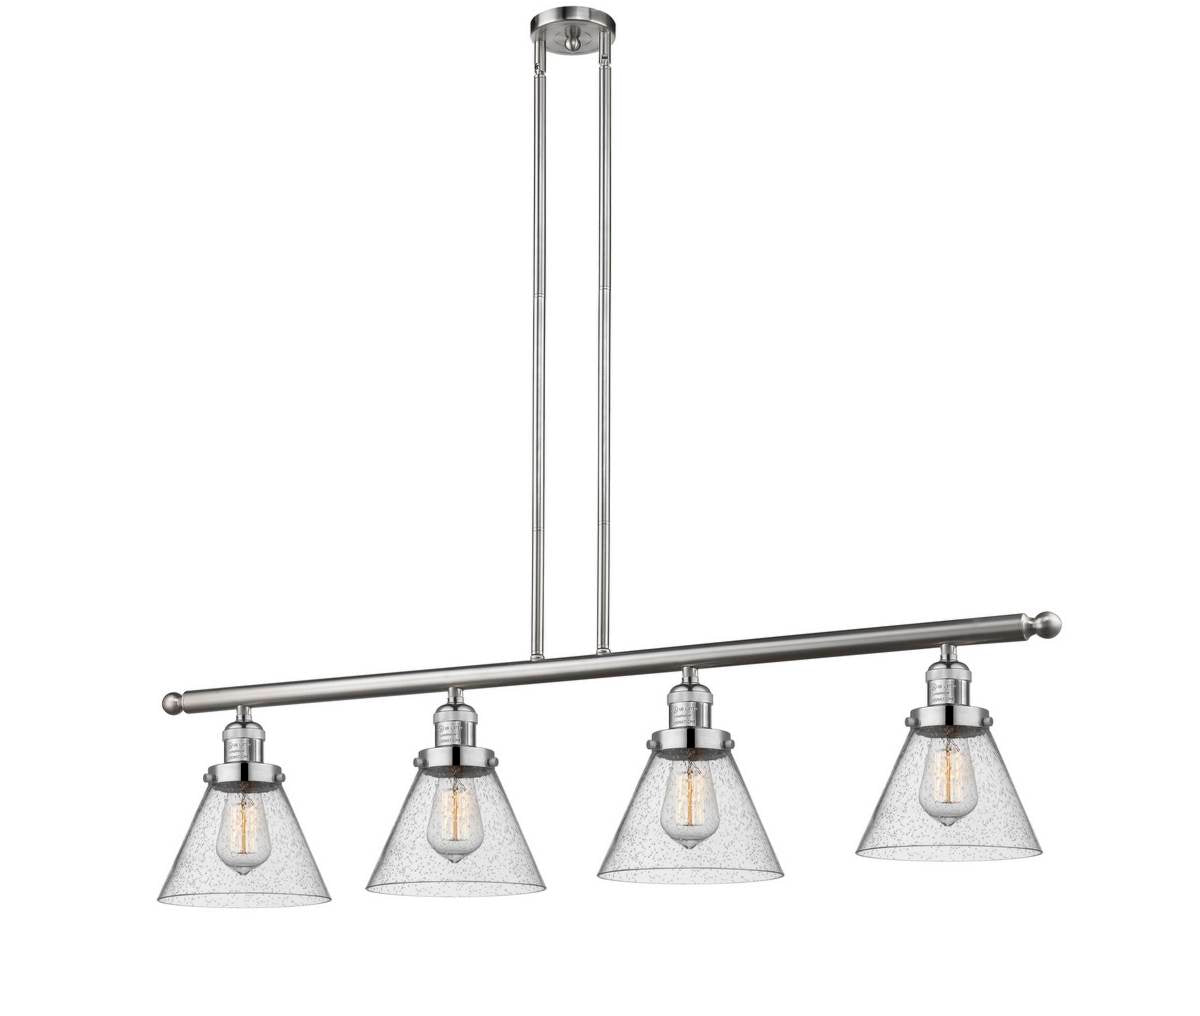 214-SN-G44 4-Light 52.375" Brushed Satin Nickel Island Light - Seedy Large Cone Glass - LED Bulb - Dimmensions: 52.375 x 7.75 x 10<br>Minimum Height : 20.25<br>Maximum Height : 44.25 - Sloped Ceiling Compatible: Yes